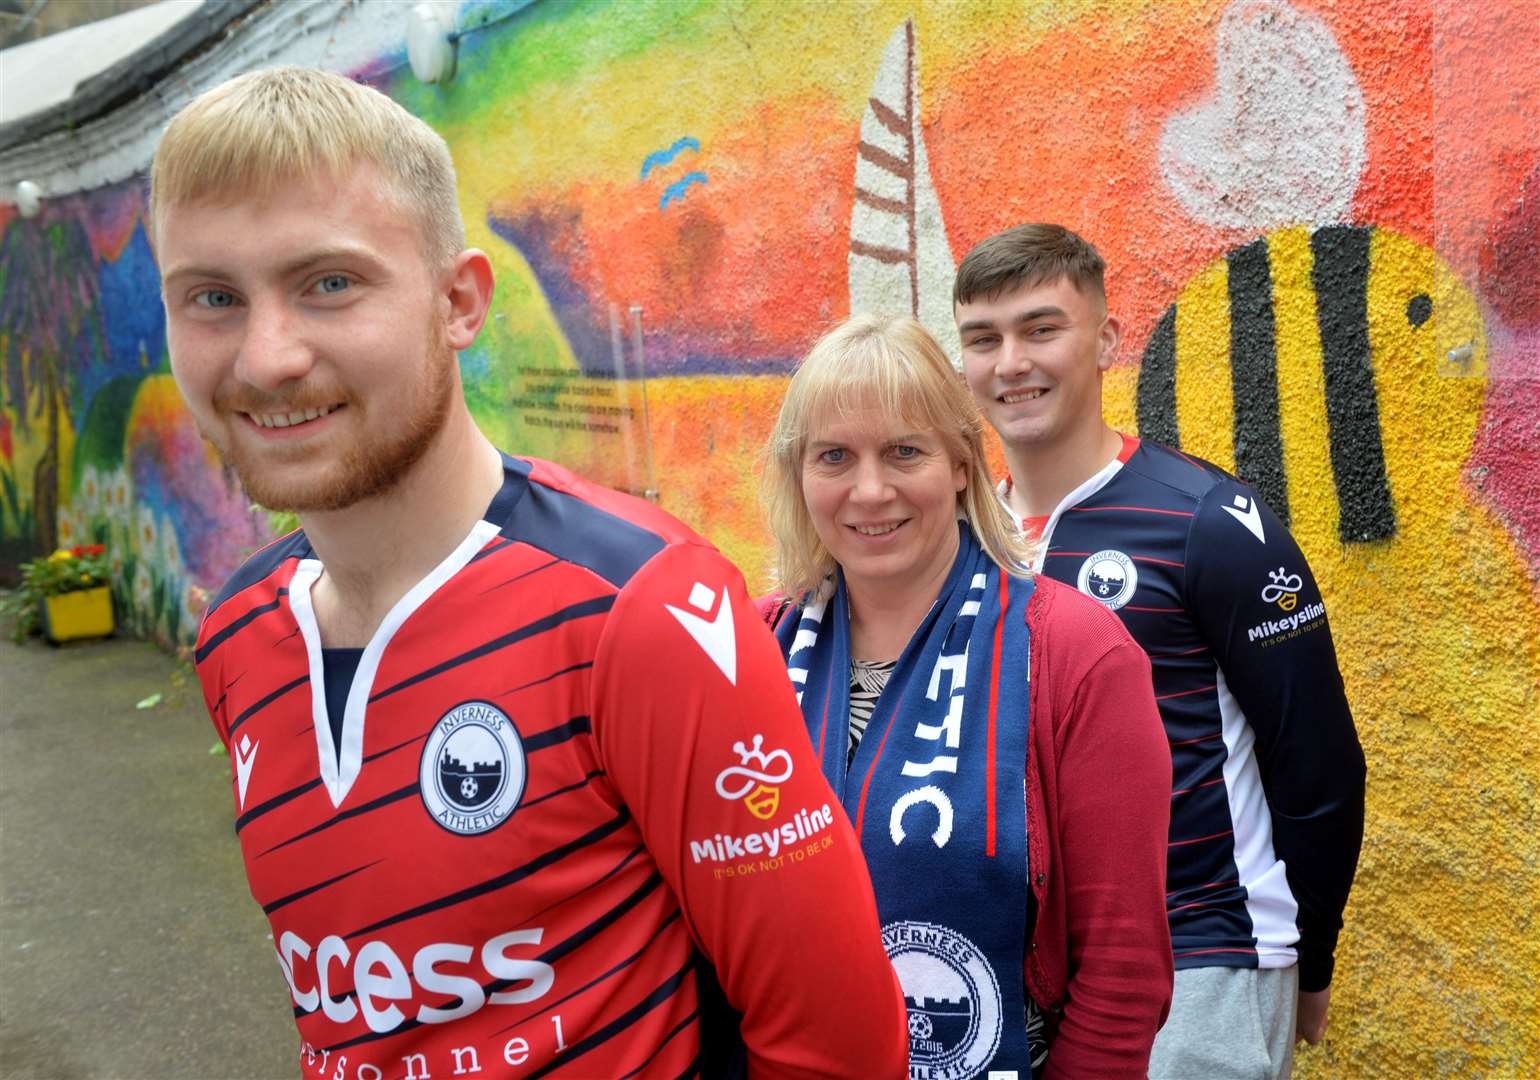 Emily Stokes, Mikeysline chief executive, with Inverness Athletic players (from left) Luke Mackay and Lennox Lauder-Smith.